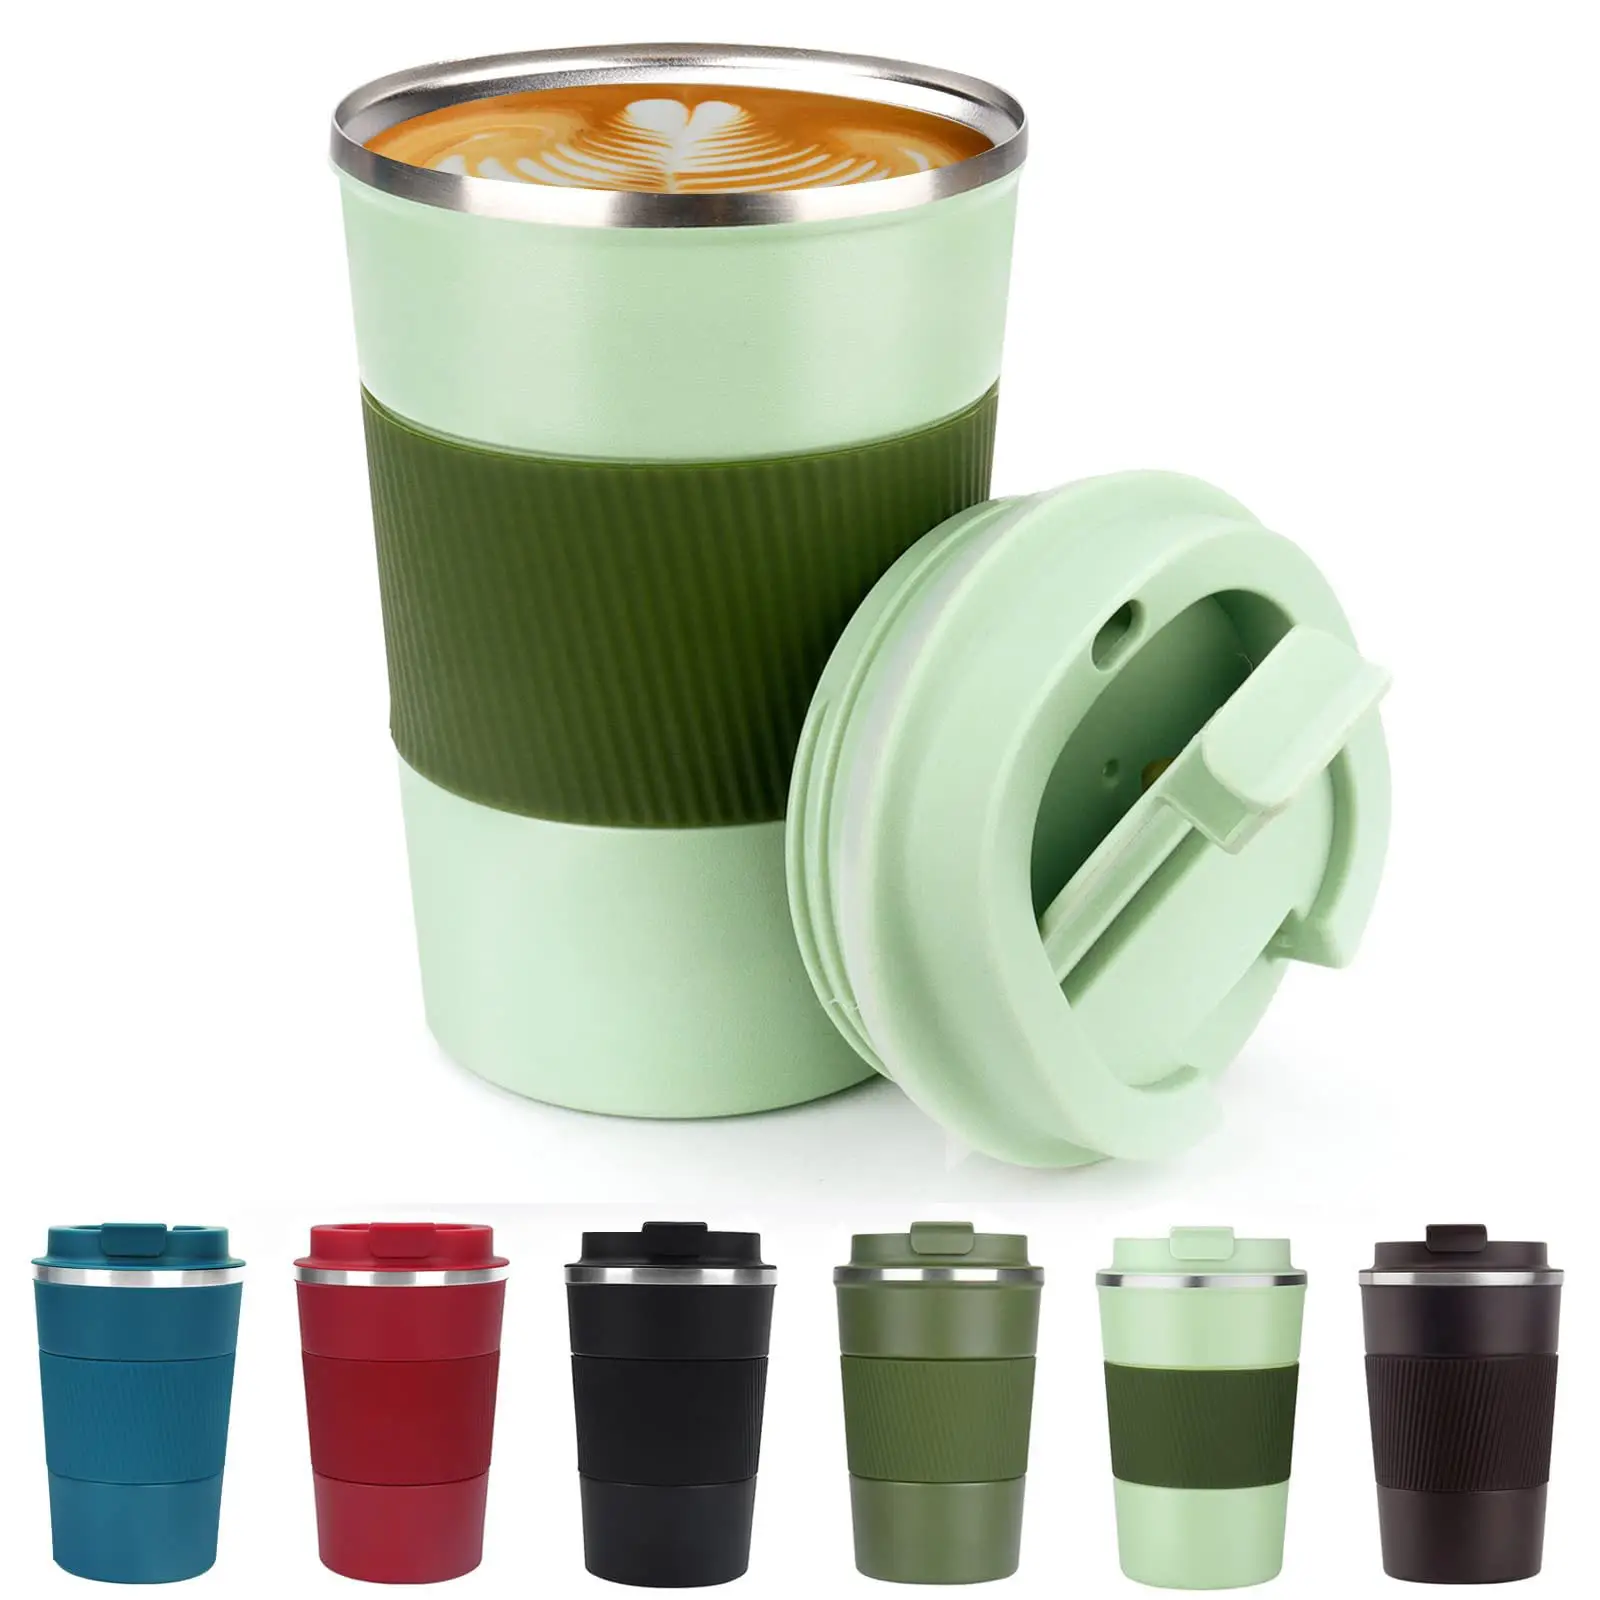 Best Sellers Vacuum Insulated Stainless Steel Tumbler Double Wall Travel Coffee Mug horoscope Cups With Silicone Sleeve